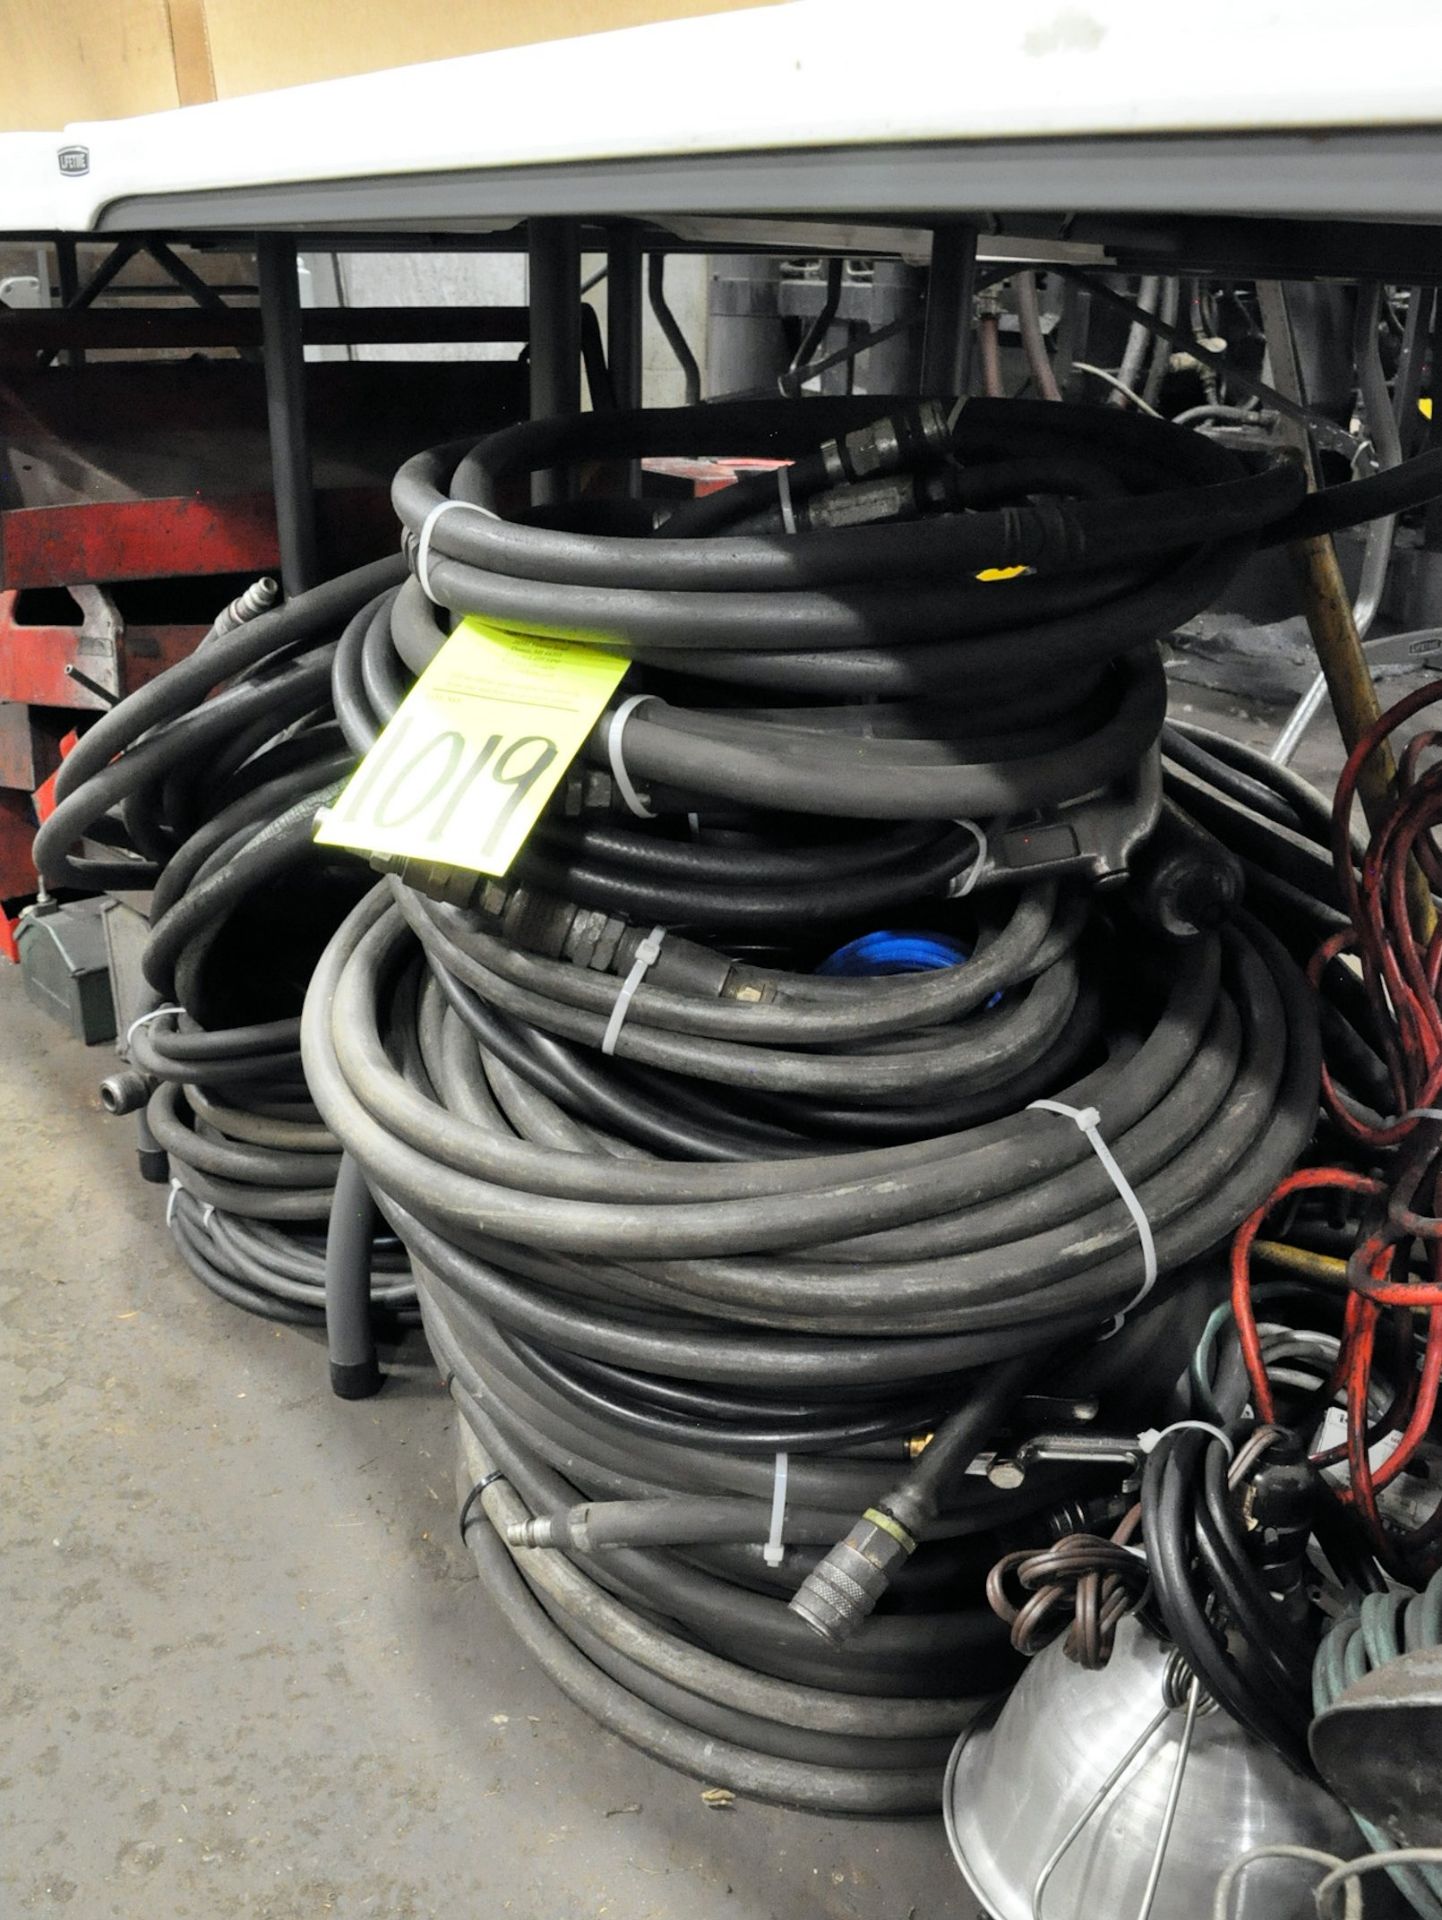 Lot-Air Hoses on Floor Under (1) Table, (E-7), (Yellow Tag)